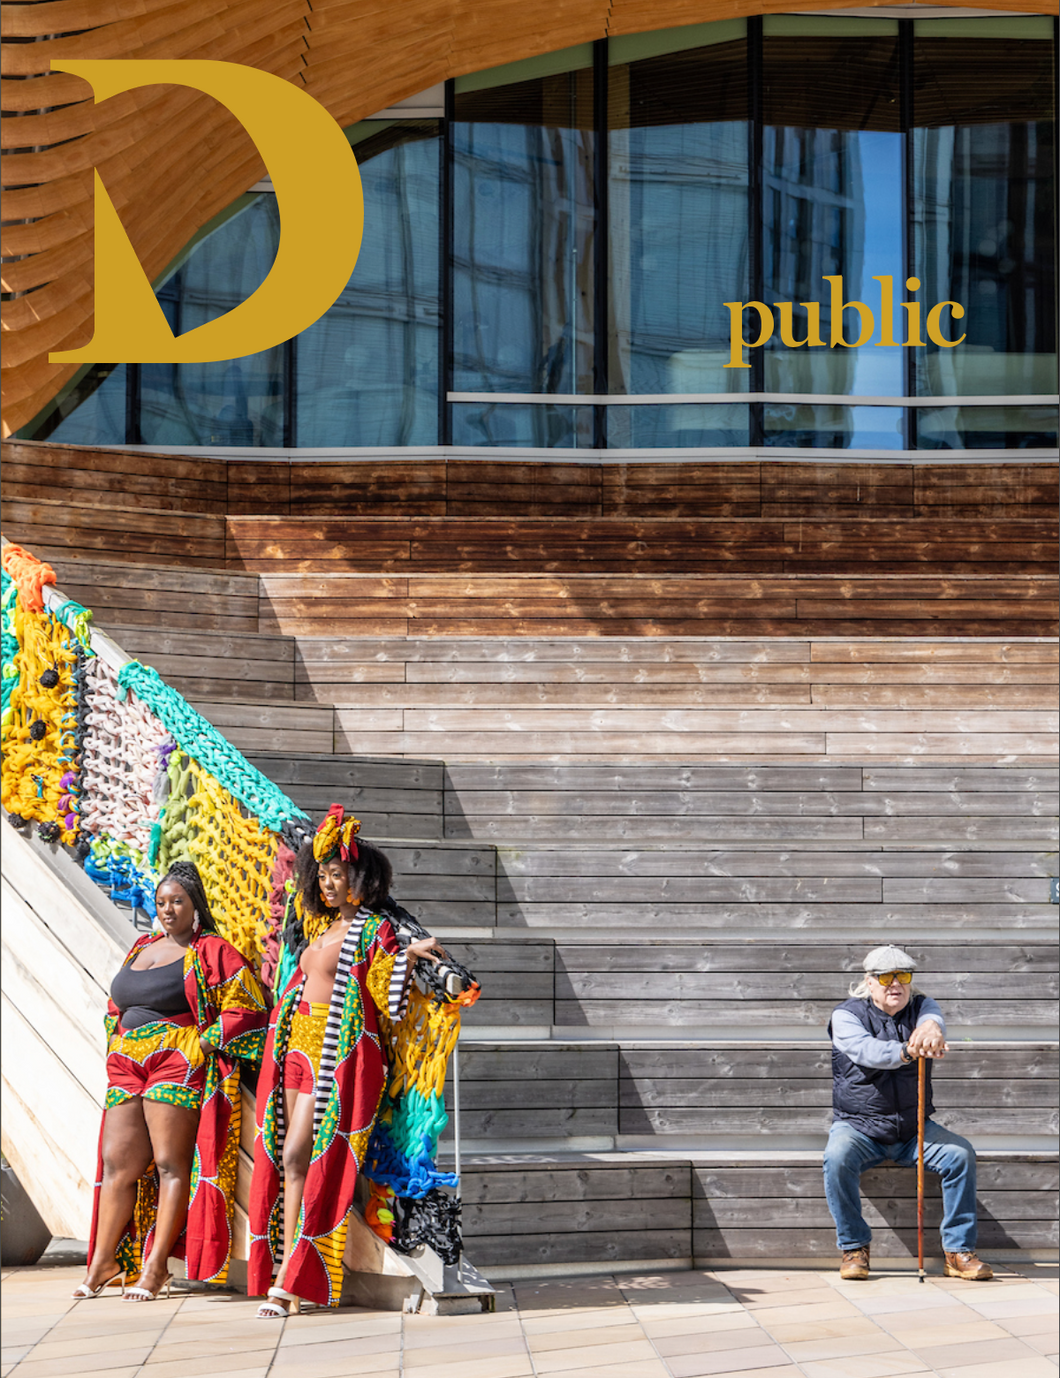 A building in London's Olympic Park, two young women pose for an unseen photograph in colourful outfits. To the right, an older person with cane sits on the wooden steps. 